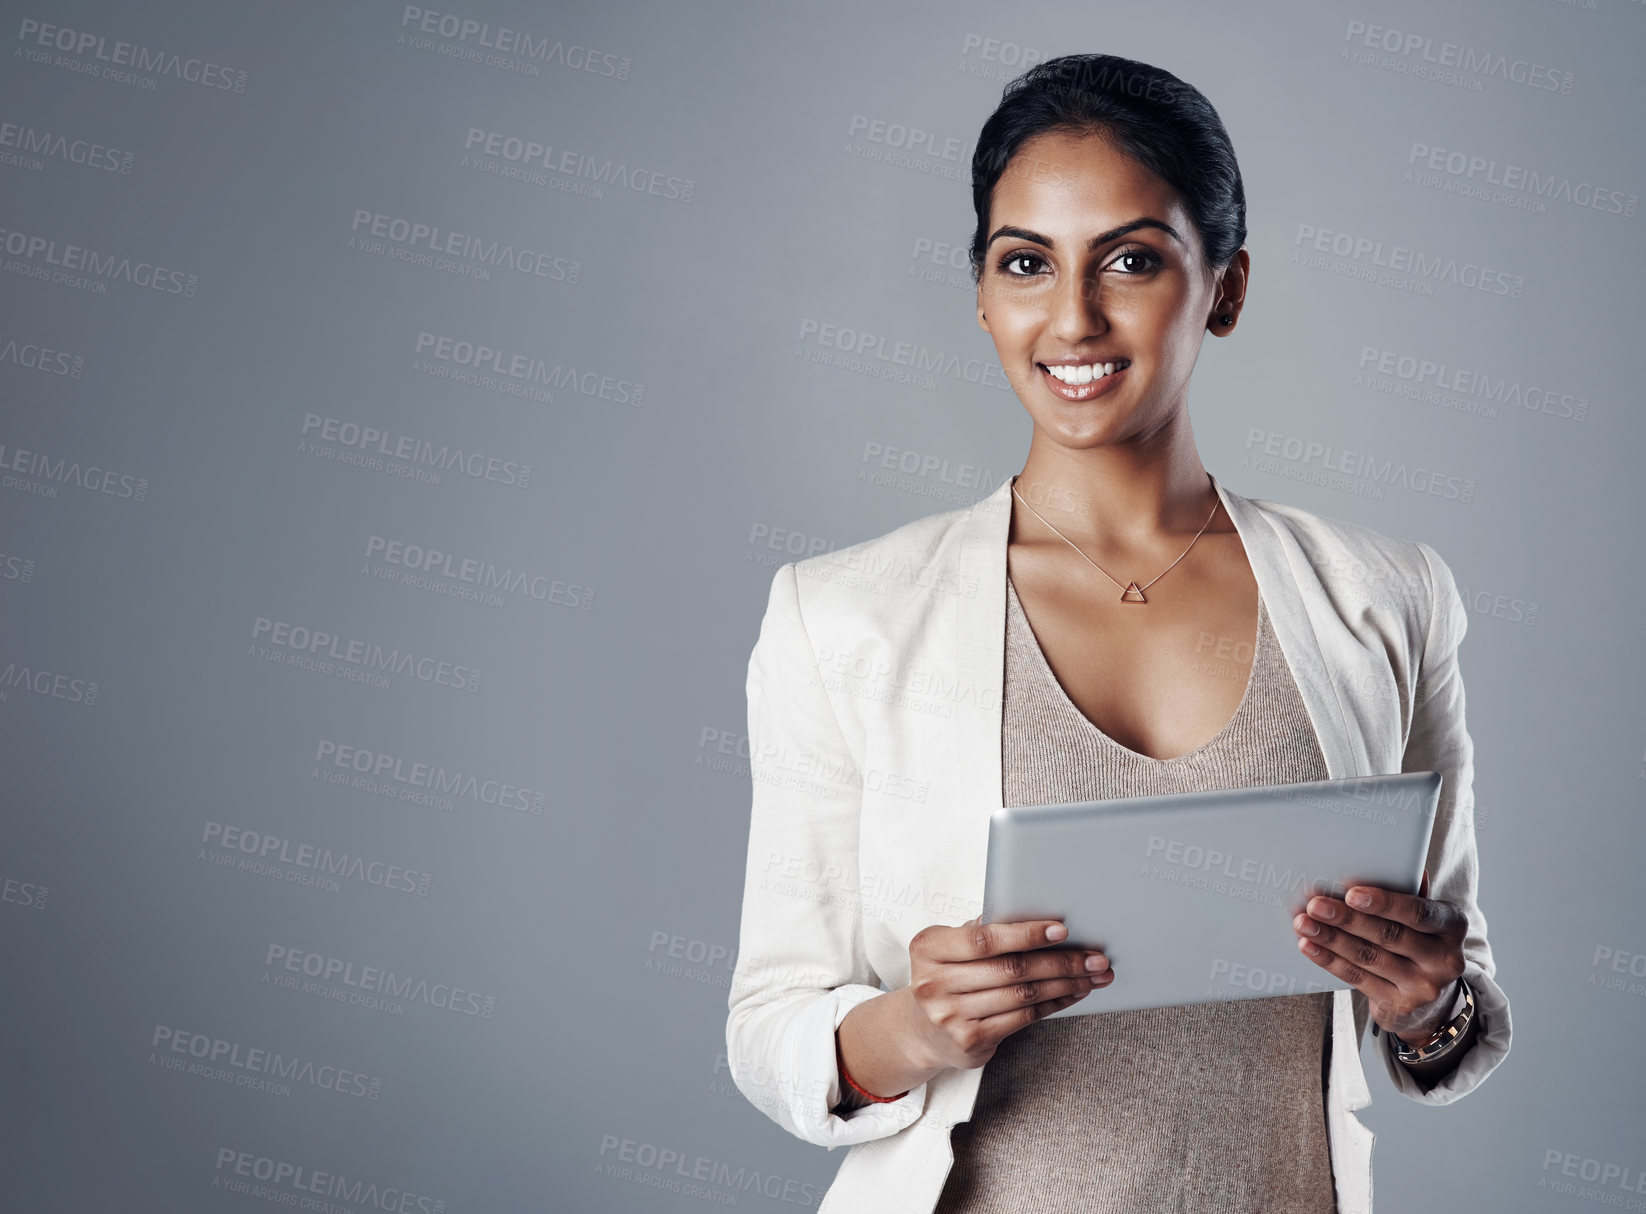 Buy stock photo Studio portrait of a young businesswoman using a digital tablet against a gray background